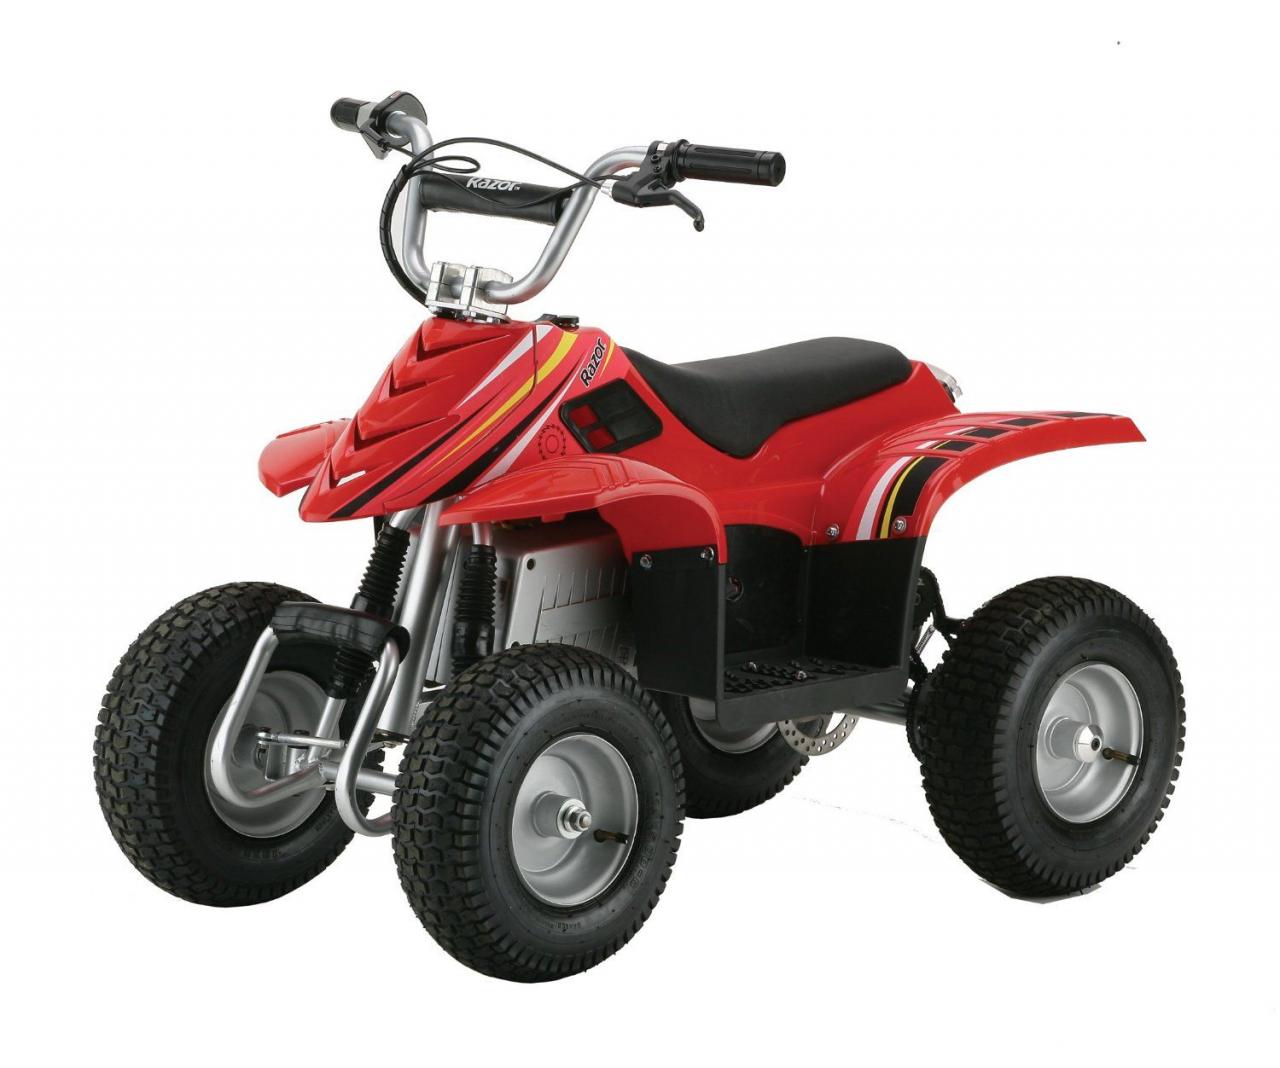 Razor Dirt Quad Electric Four-Wheeled Off-Road Vehicle Red – My Ultimate  Review - mydirtbike.com - The Home Of Hot Dirtbikes | Four wheelers for kids,  Ride on toys, Quad